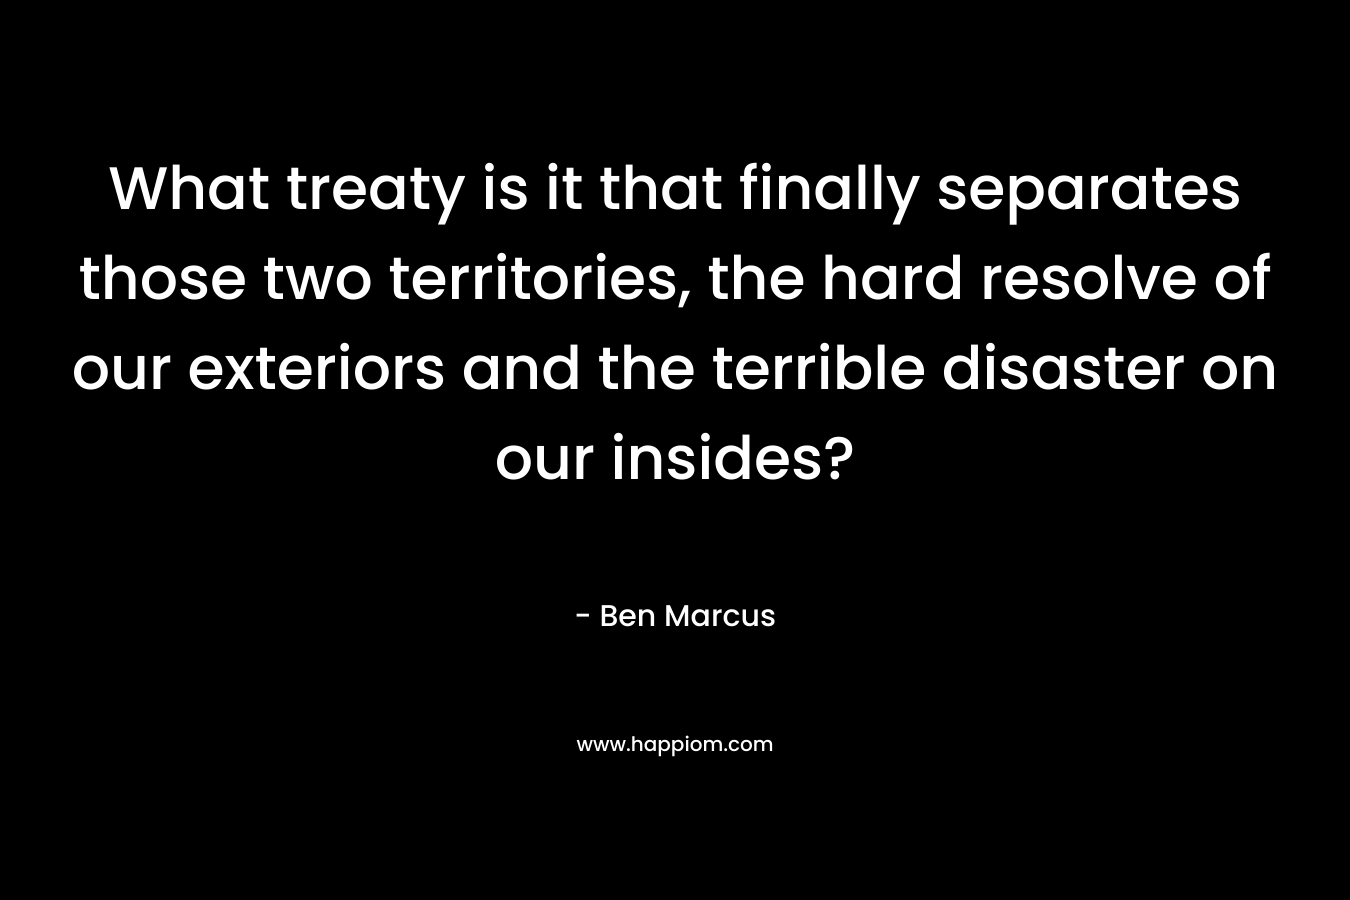 What treaty is it that finally separates those two territories, the hard resolve of our exteriors and the terrible disaster on our insides? – Ben Marcus